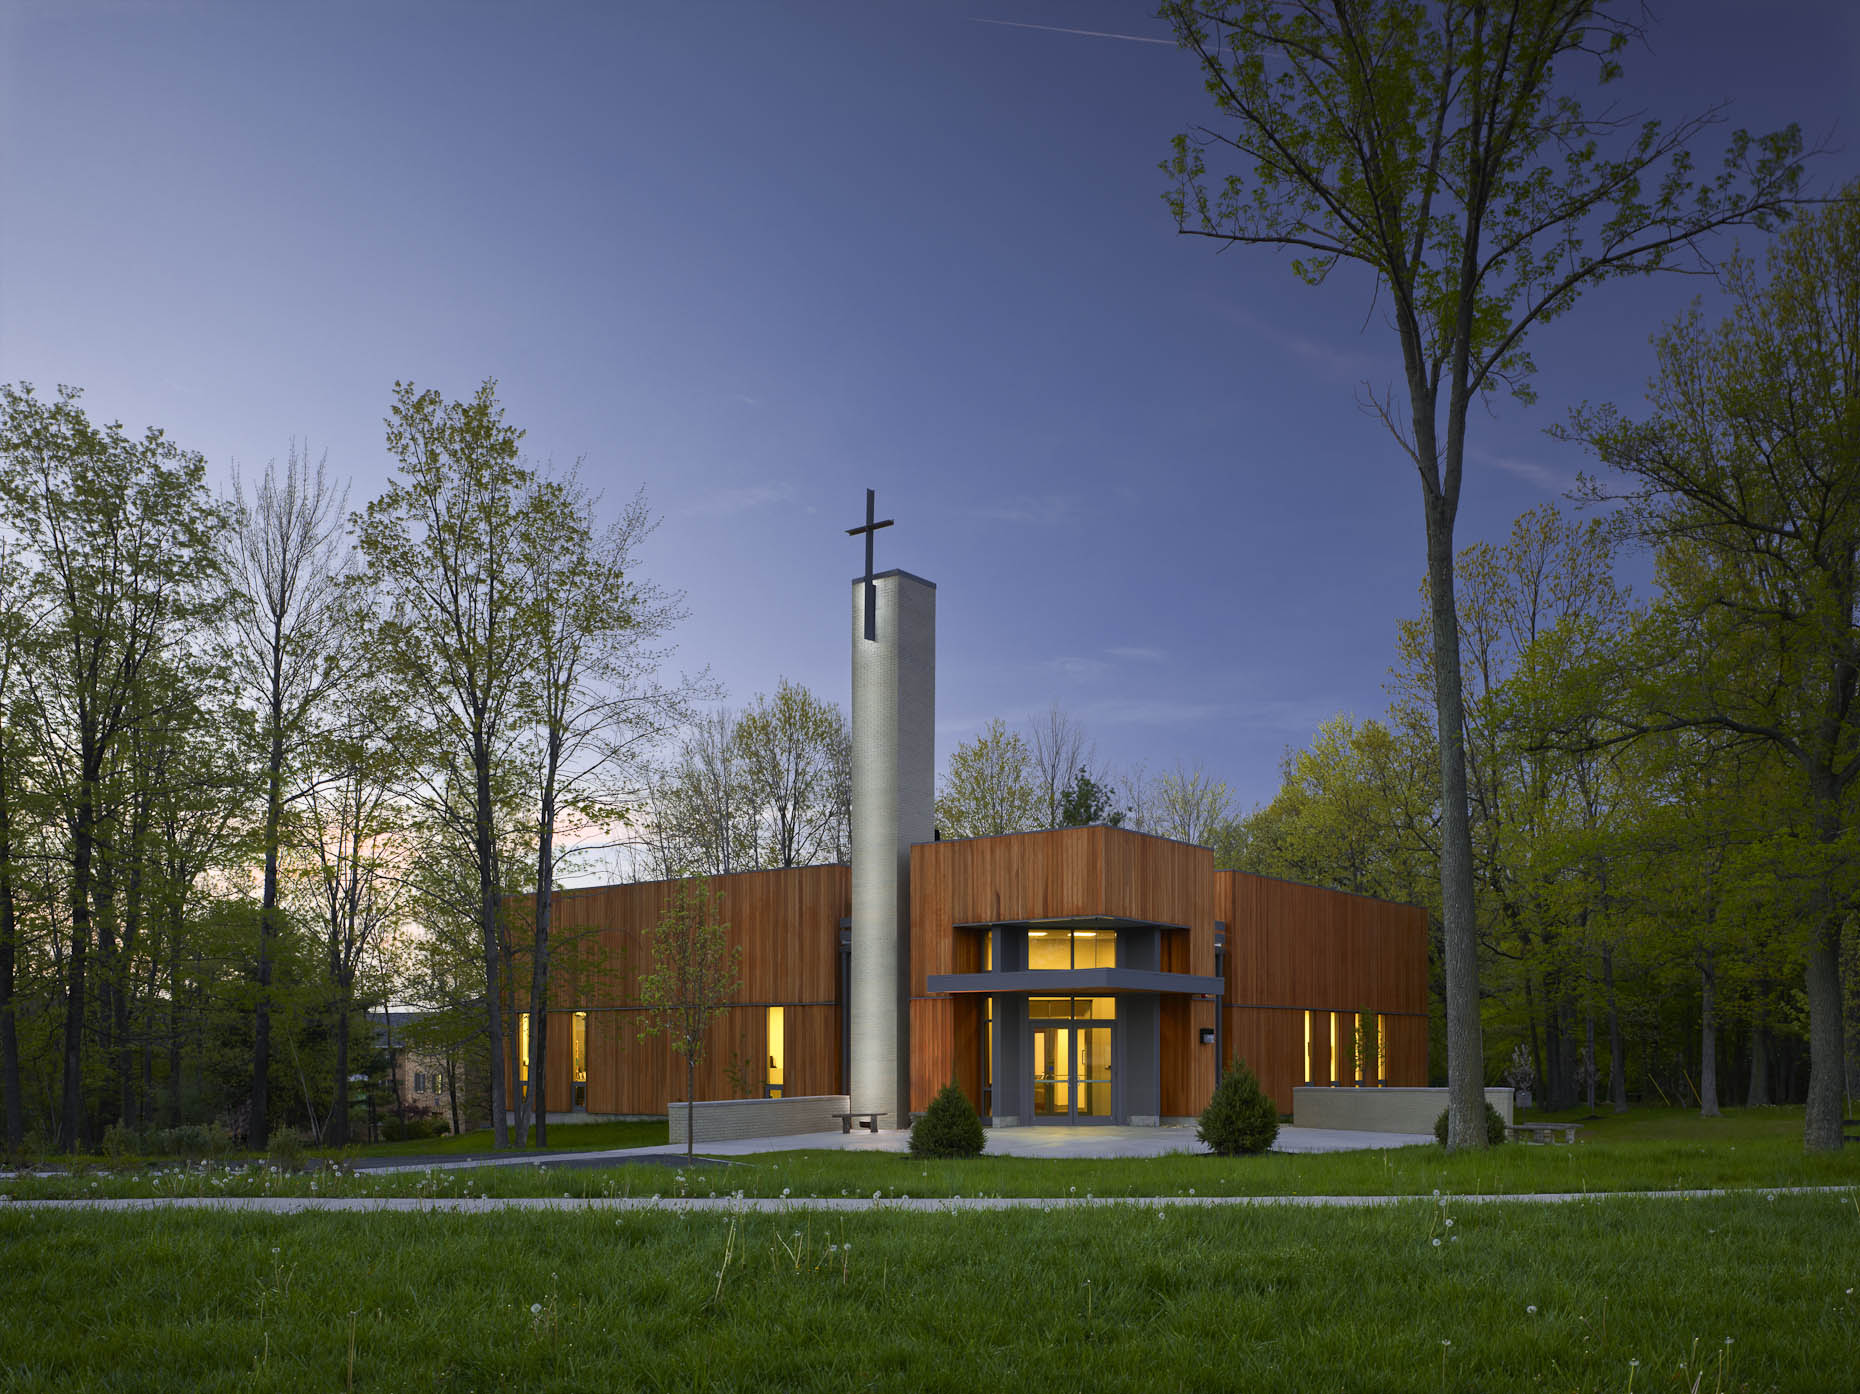 Wright State University St. John Bosco Chapel by The Collective photographed by Brad Feinknopf based in Columbus, Ohio